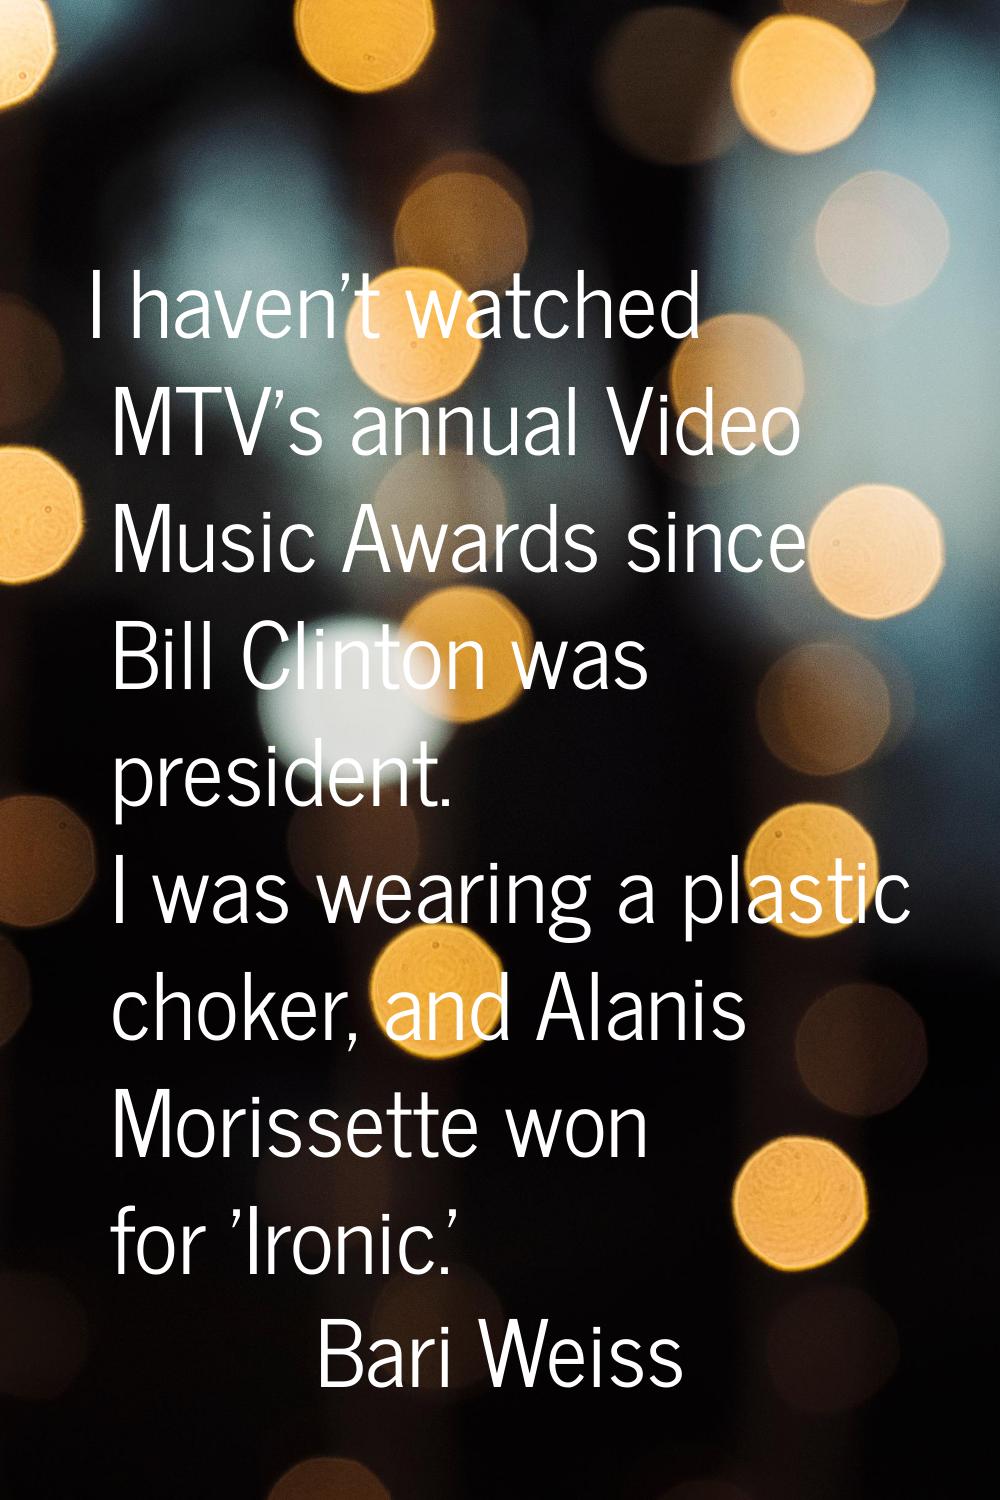 I haven't watched MTV's annual Video Music Awards since Bill Clinton was president. I was wearing a